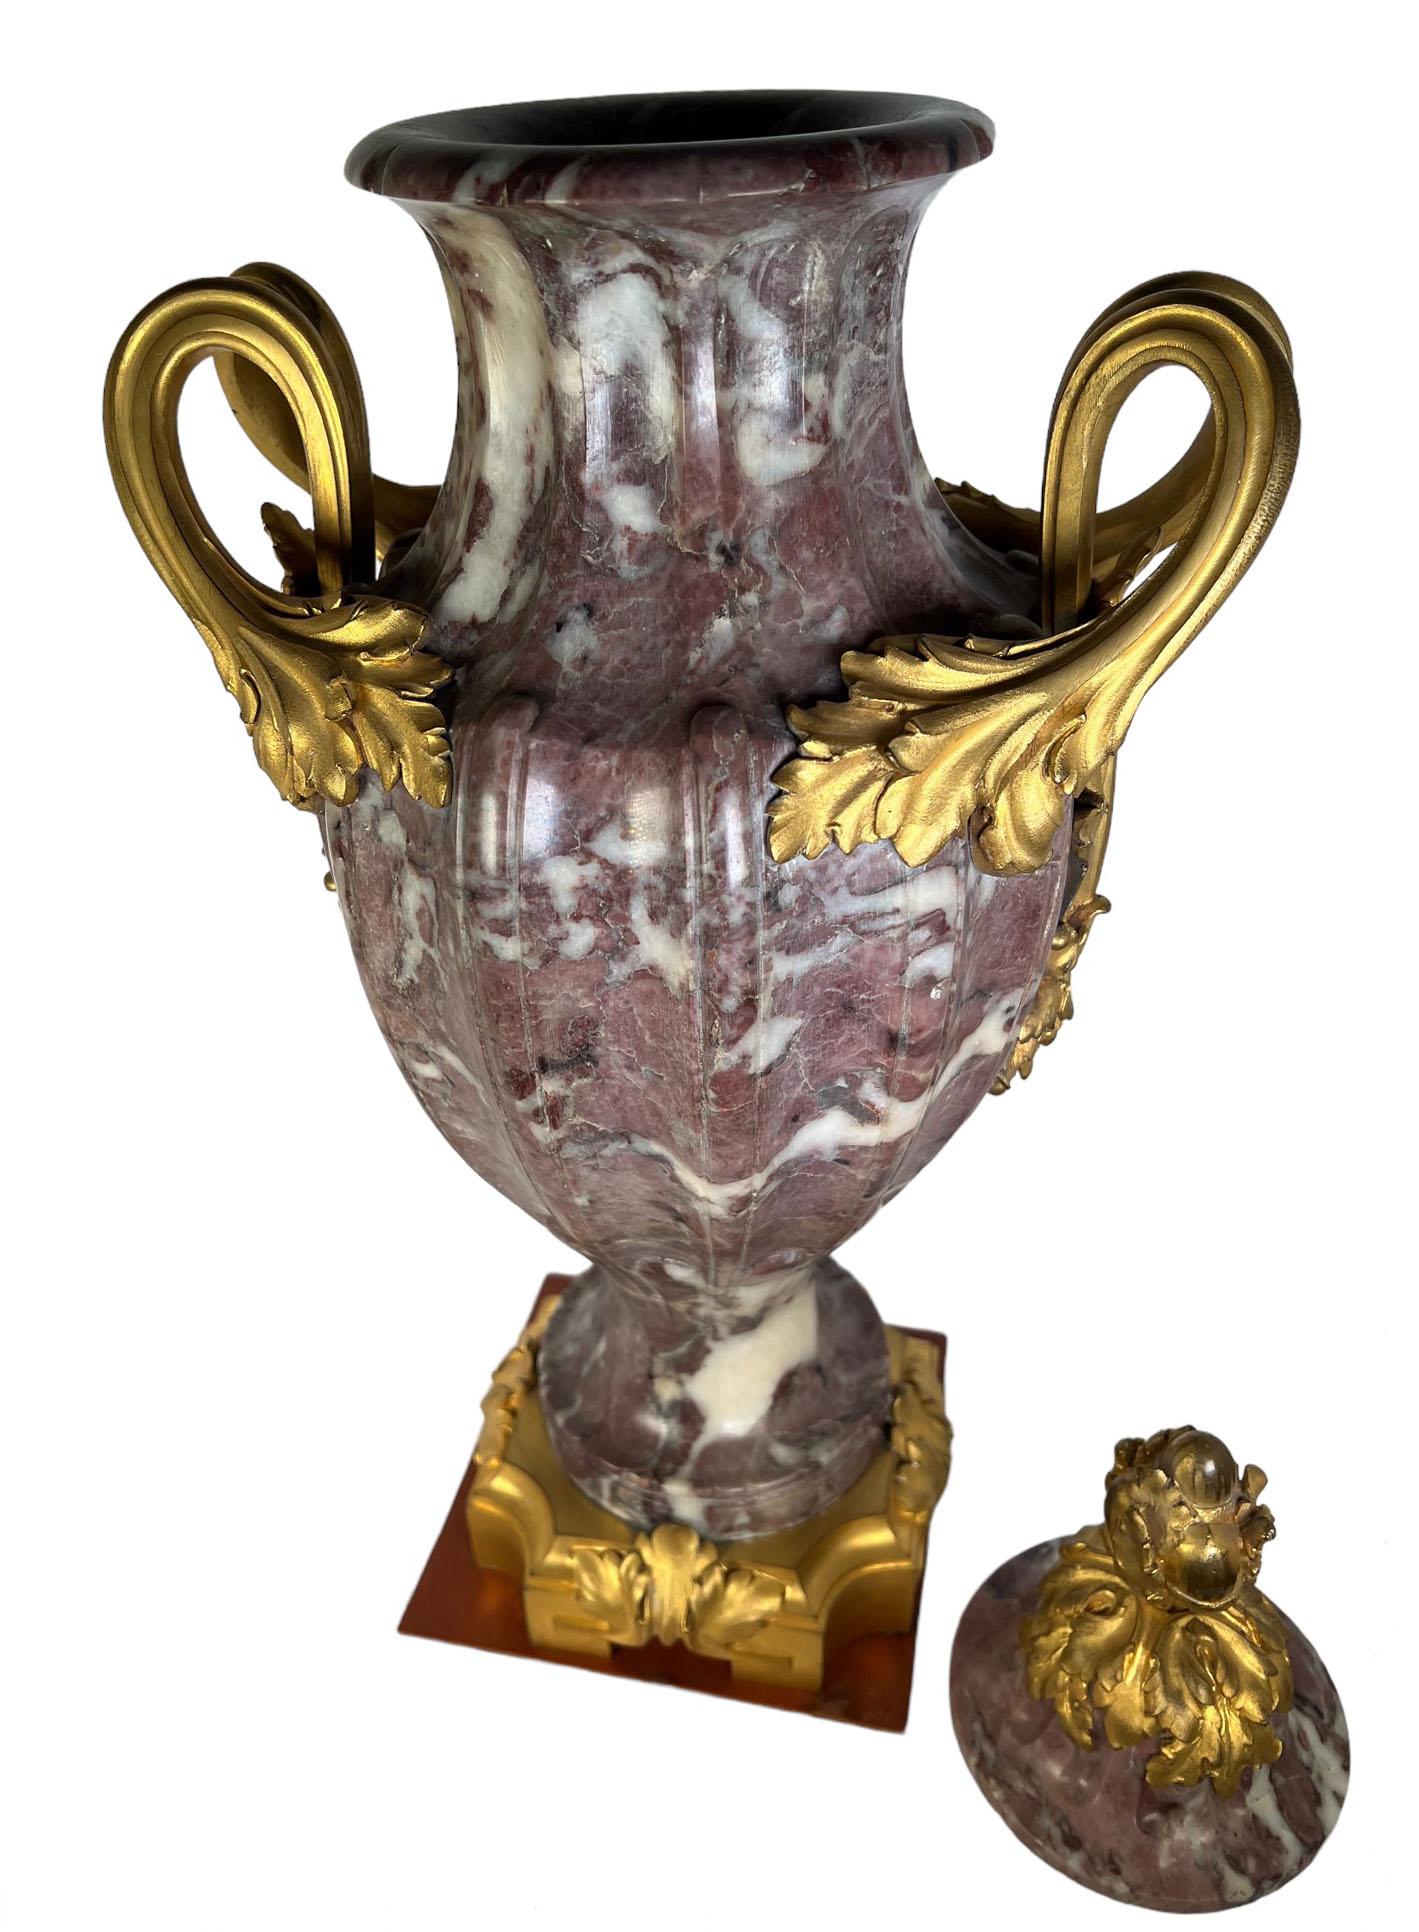 A purple fluted marble urn with bronze dore mounts, handles and lid. Theres a Paris, France foundry mark and signature on the base by F. Rambaud. Circa 1870.